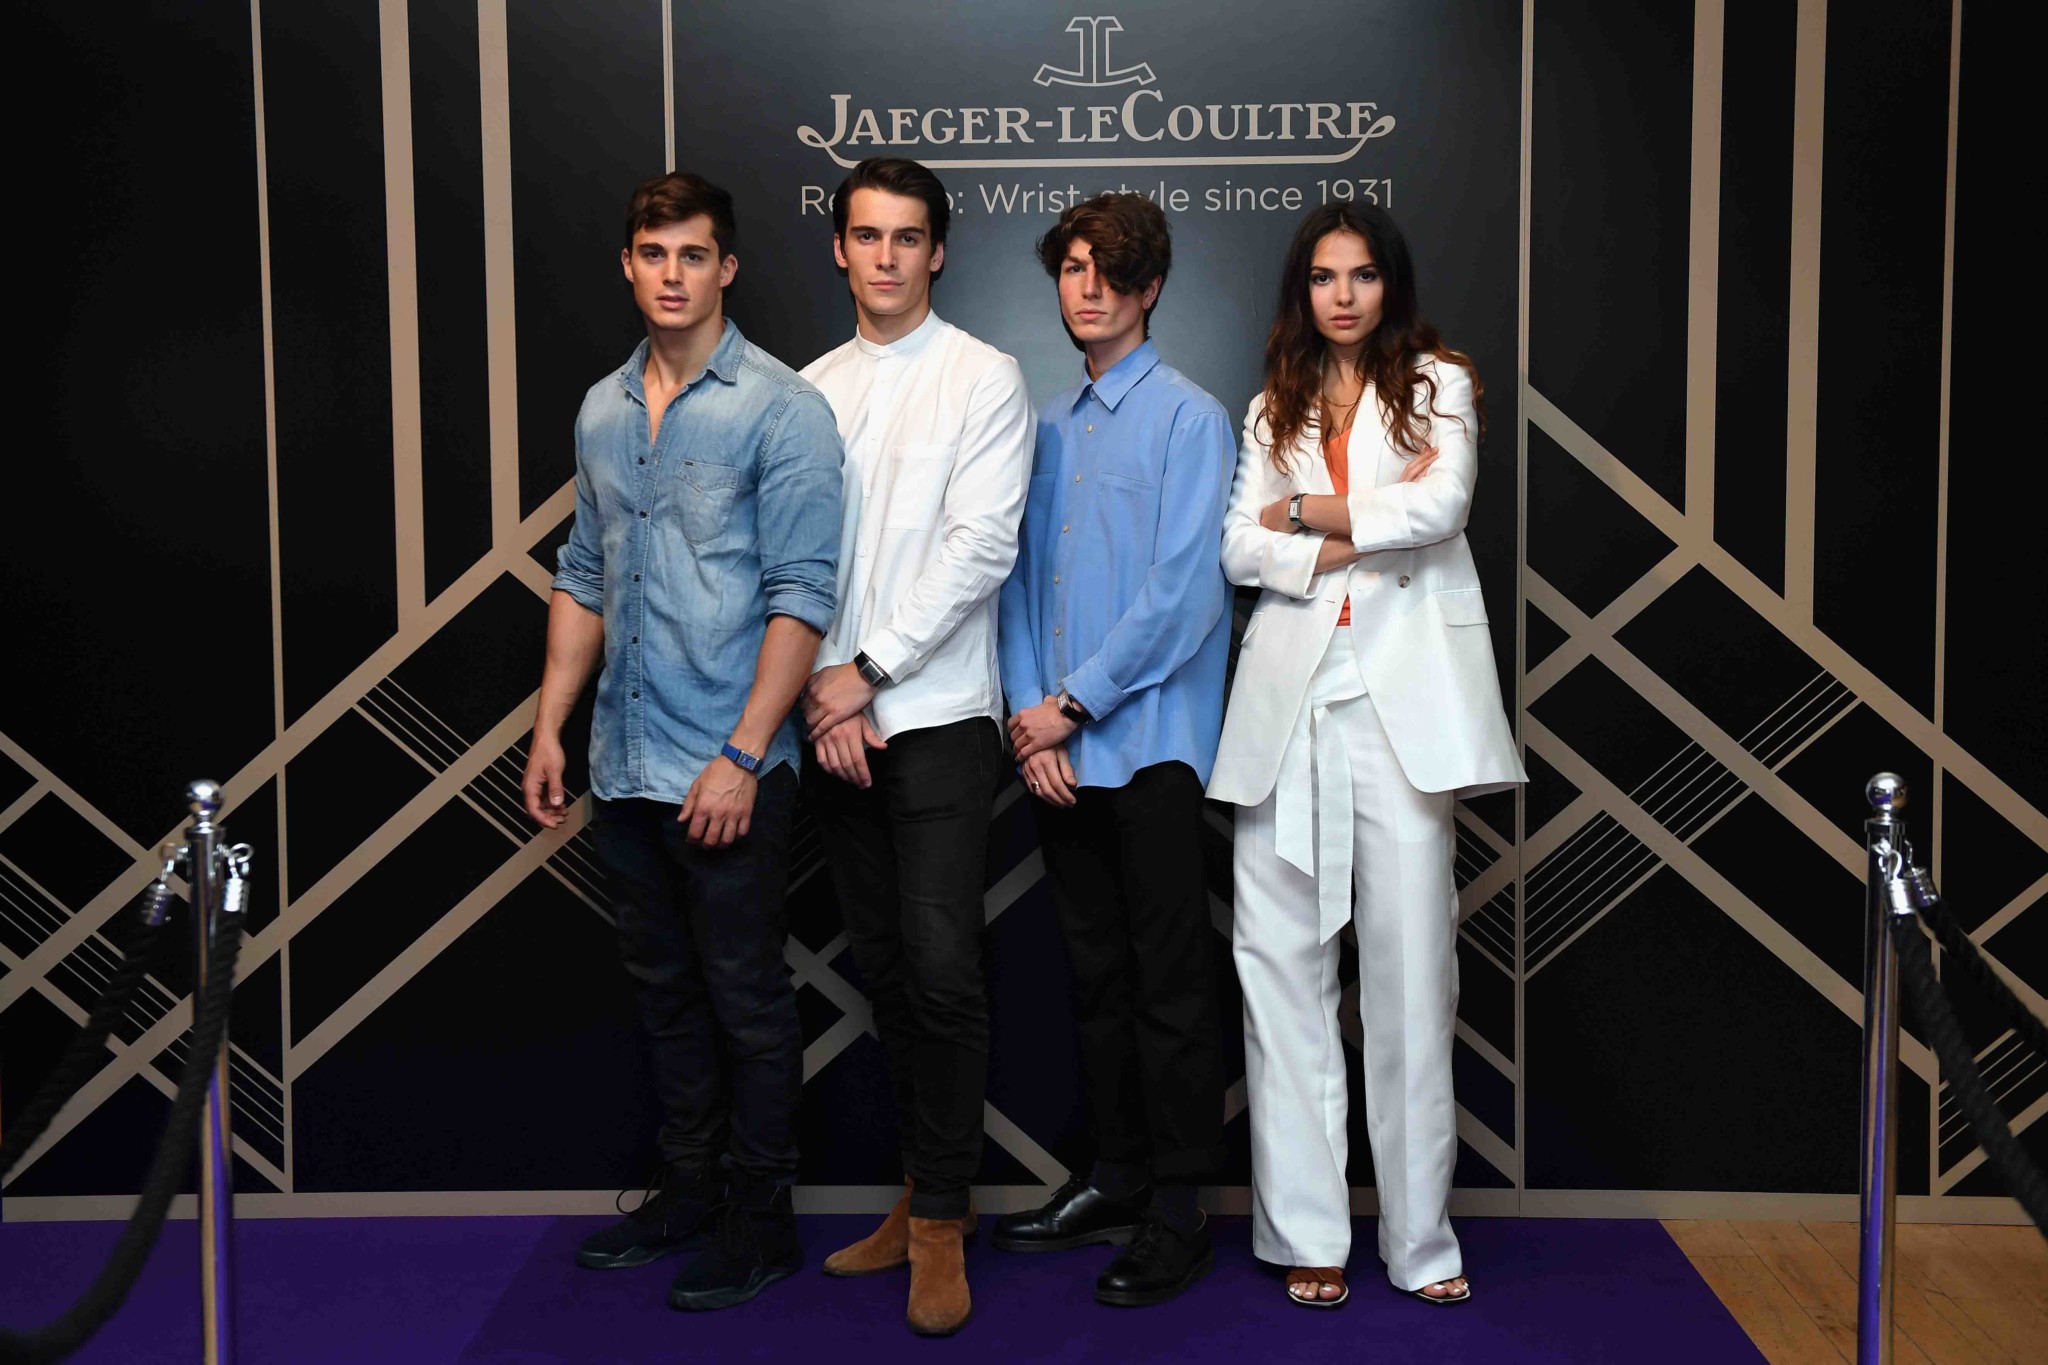 London, england - may 31: (l-r) pietro boselli, harry rowley, zaki maoui and doina ciobanu attend jaeger-lecoultre & christie's "roaring 20's, reverso 30's" party at christie's south kensington on may 31, 2017 in london, england. (photo by chris j ratcliffe/getty images for jaeger-lecoultre) *** local caption *** pietro boselli; harry rowley; zaki maoui; doina ciobanu